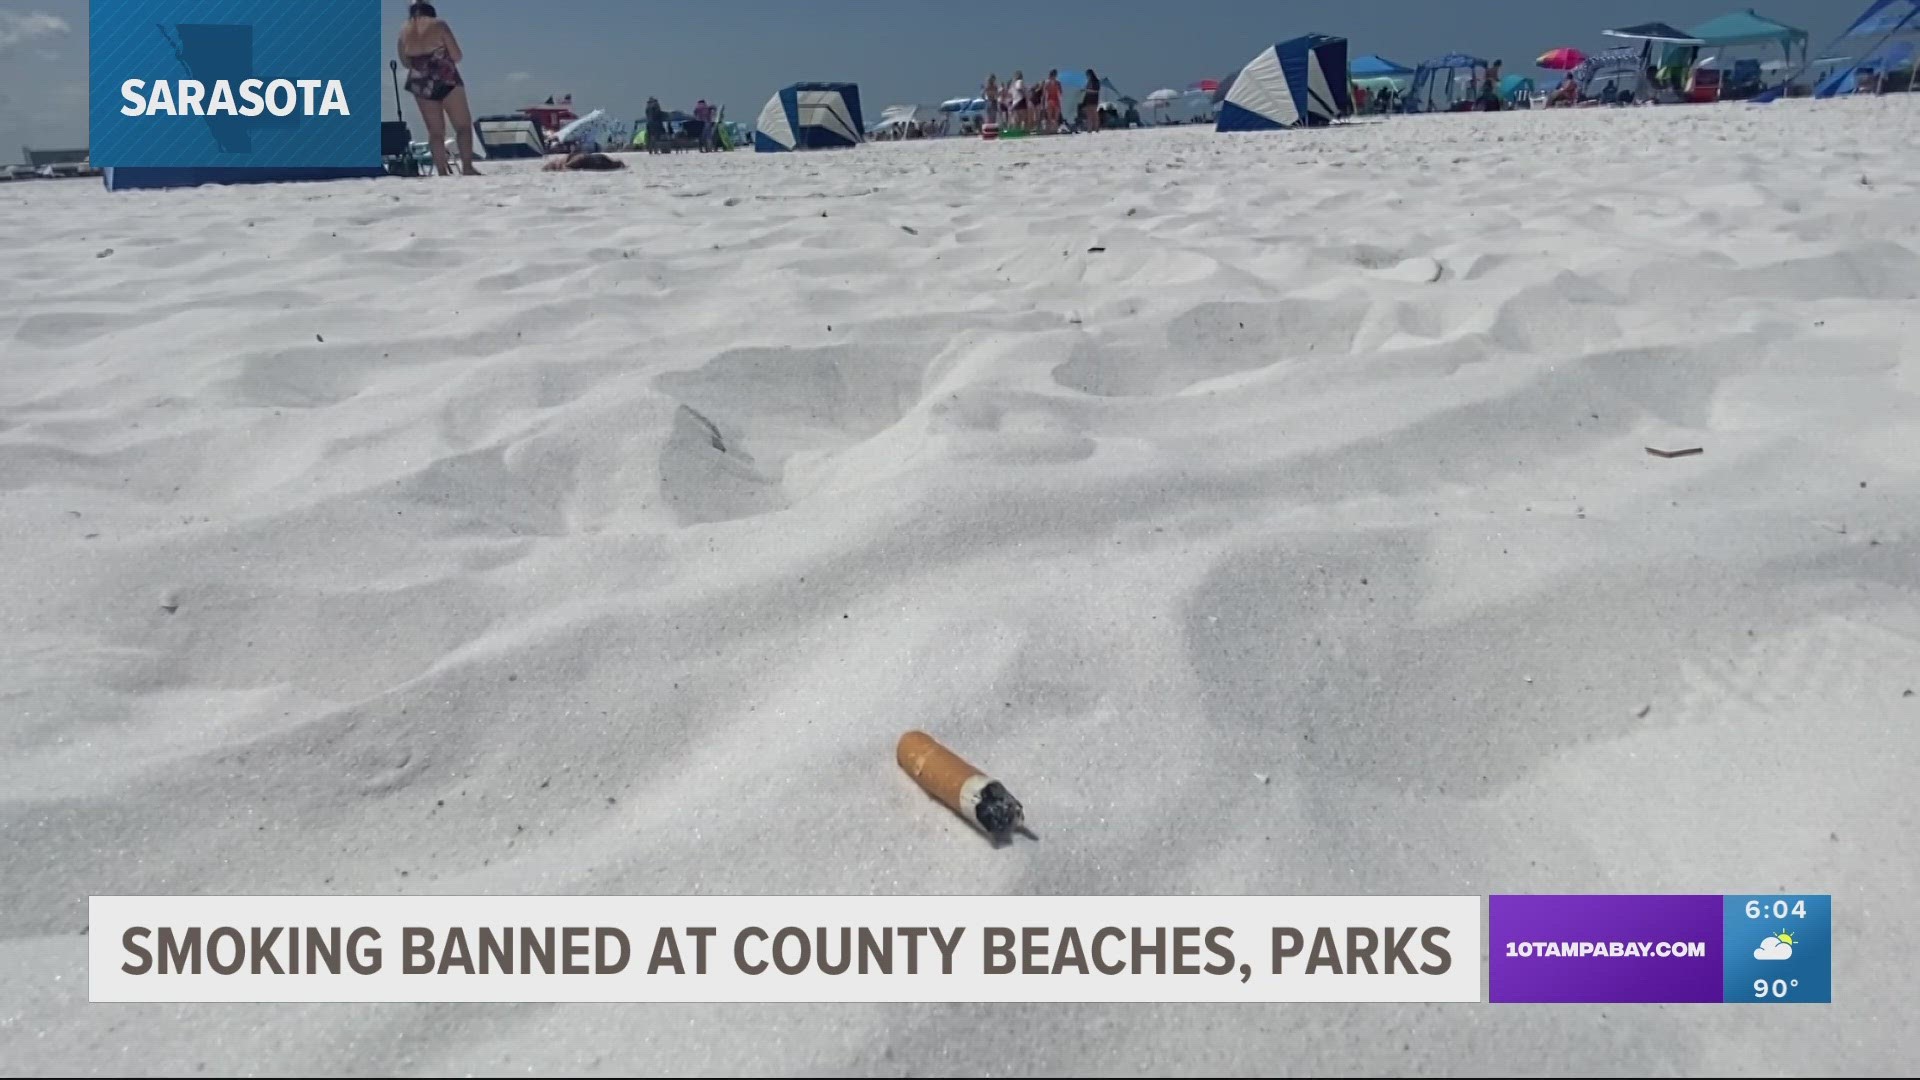 The state legislature passed a law allowing counties and municipalities in Florida to ban smoking at beaches an parks in July 2022.